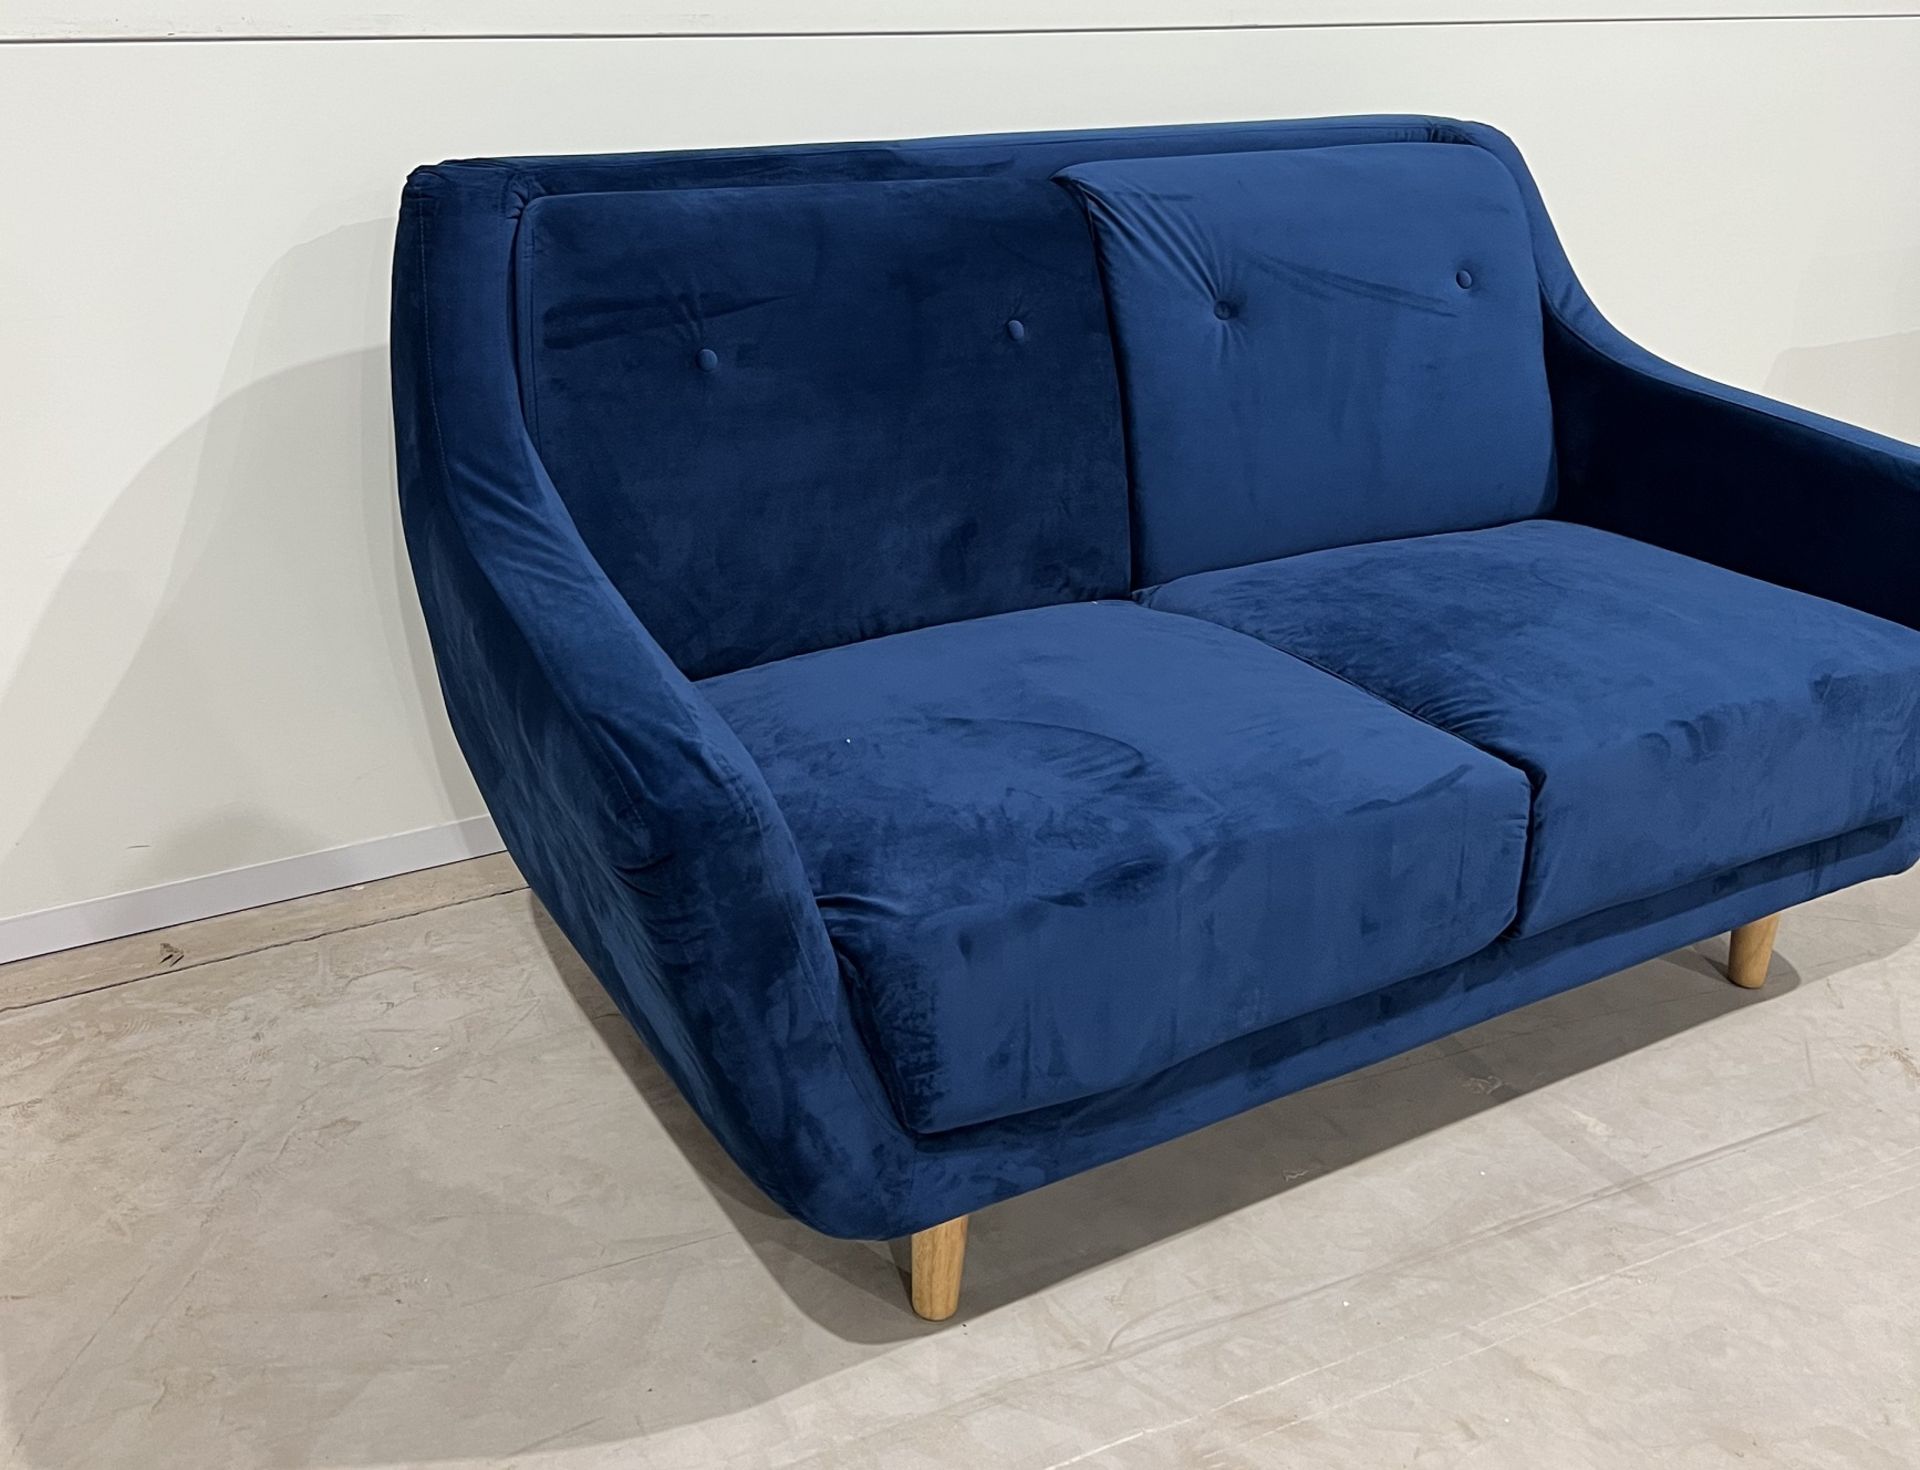 Lance Two Seater Sofa In Royal Blue Upholstery And Light Ash Leg Finiish This Welcoming Shape Is - Image 2 of 2